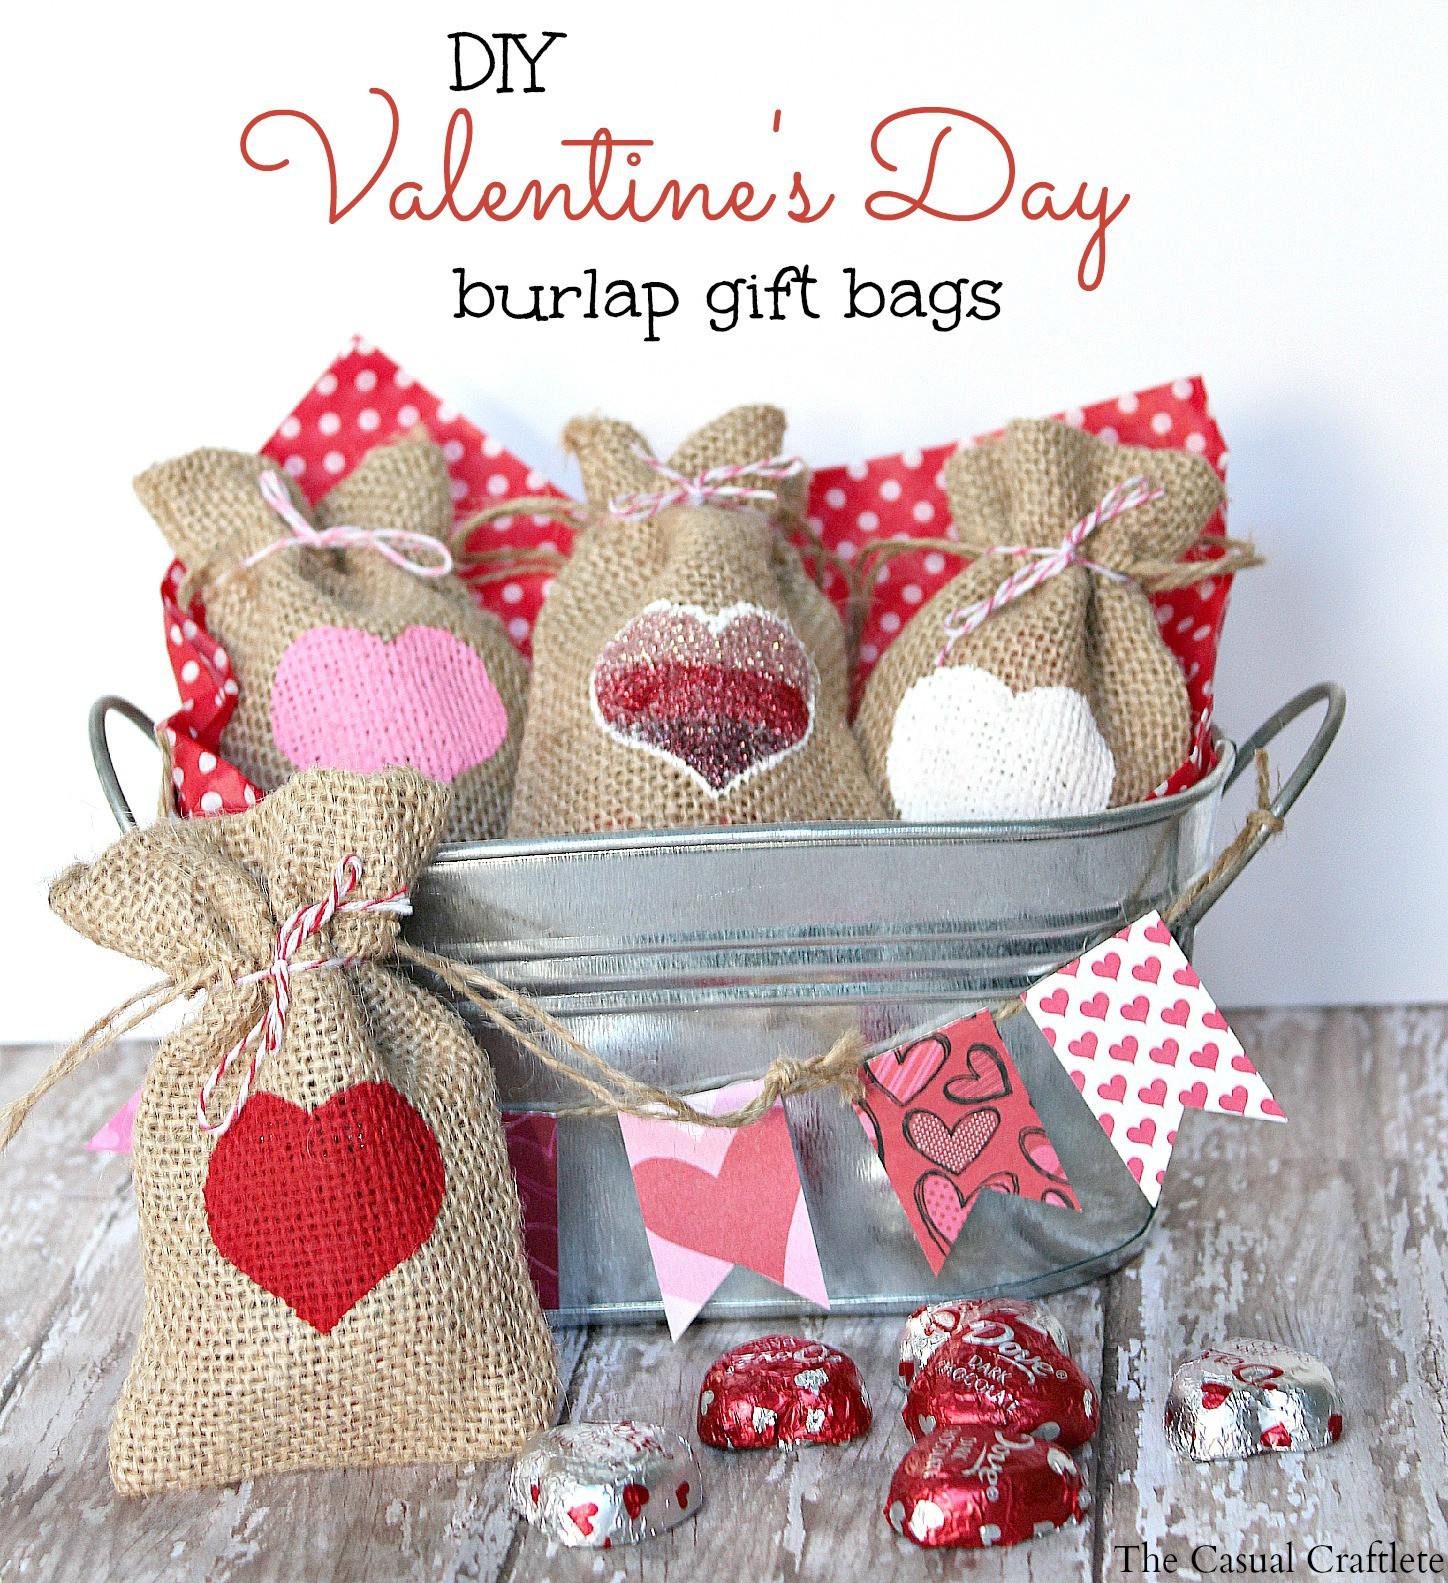 Home Made Gift Ideas For Valentines Day
 DIY Valentine s Day Burlap Gift Bags